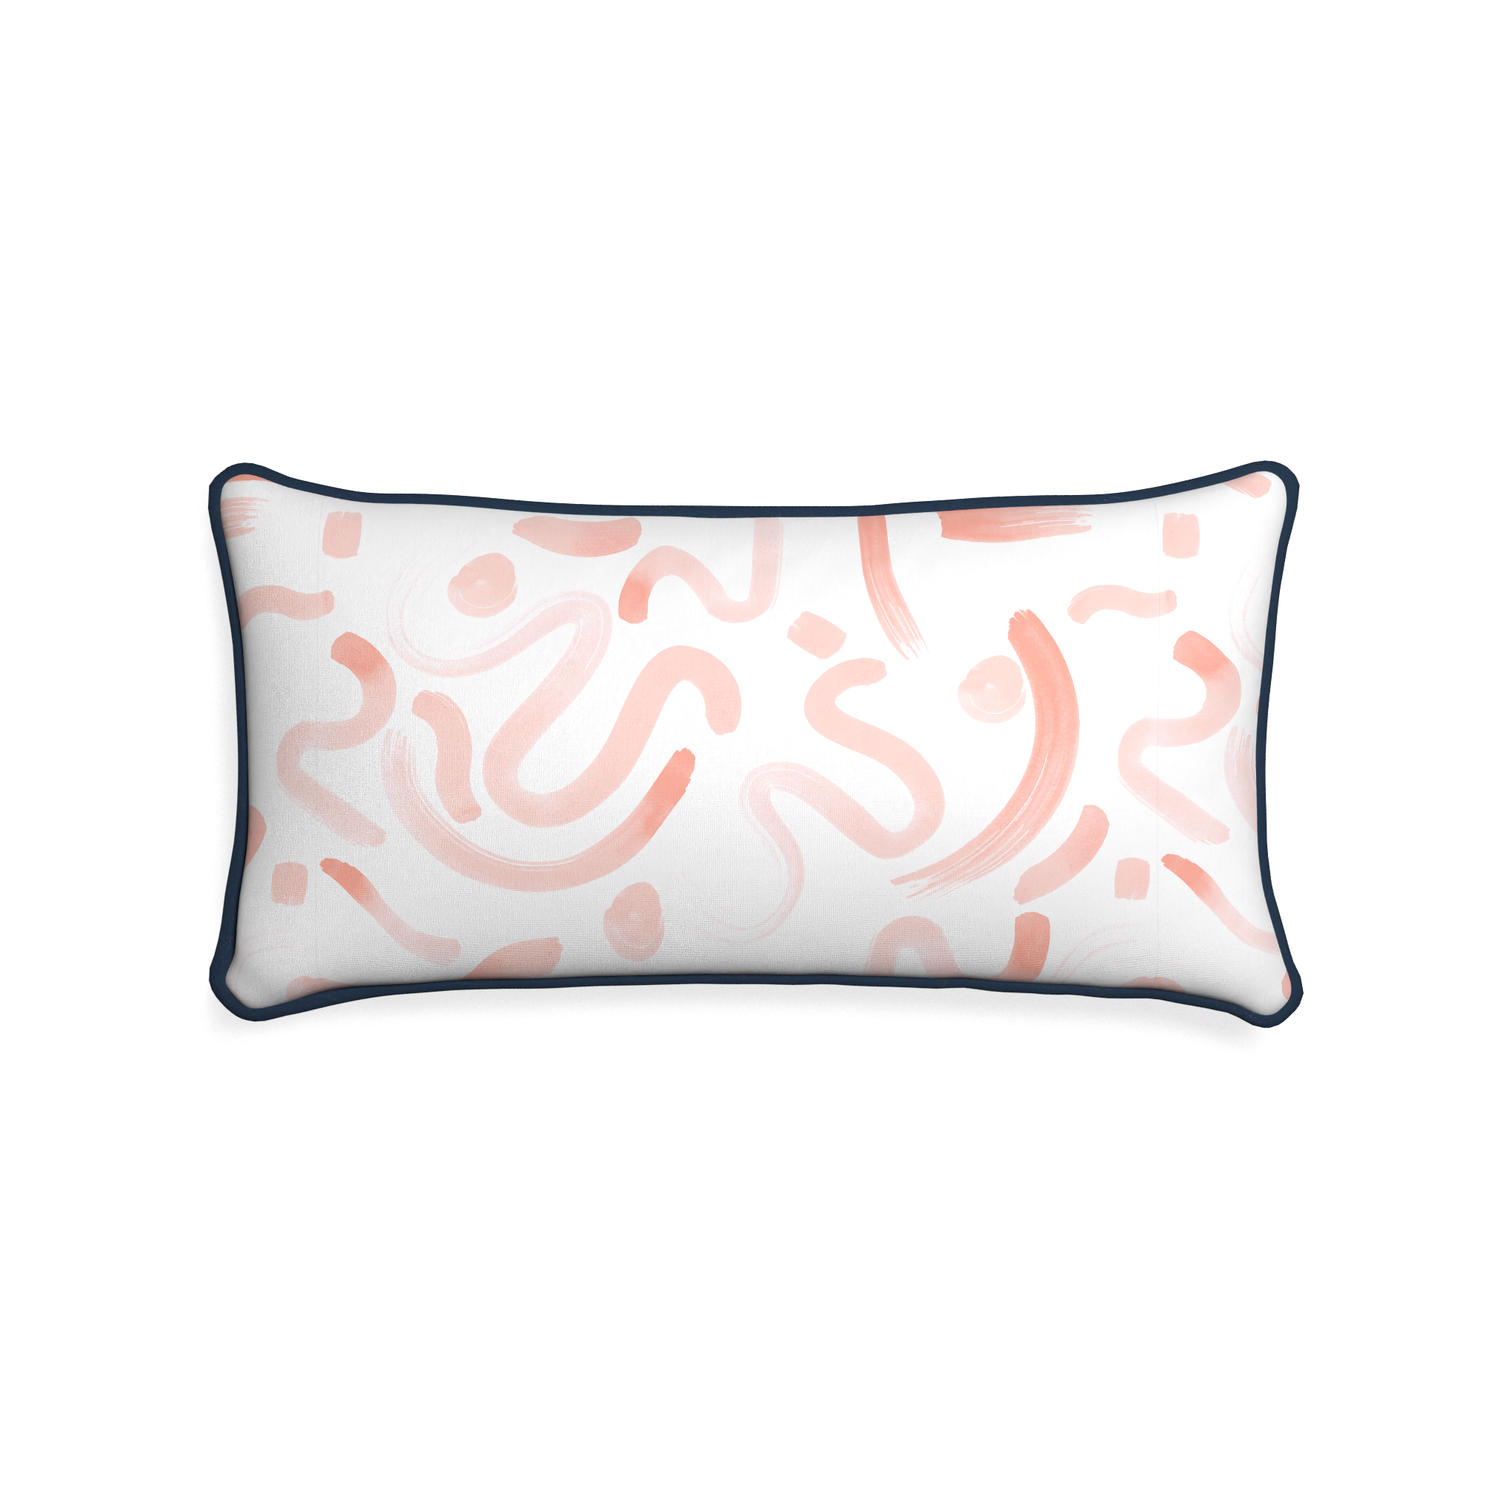 Midi-lumbar hockney pink custom pink graphicpillow with c piping on white background